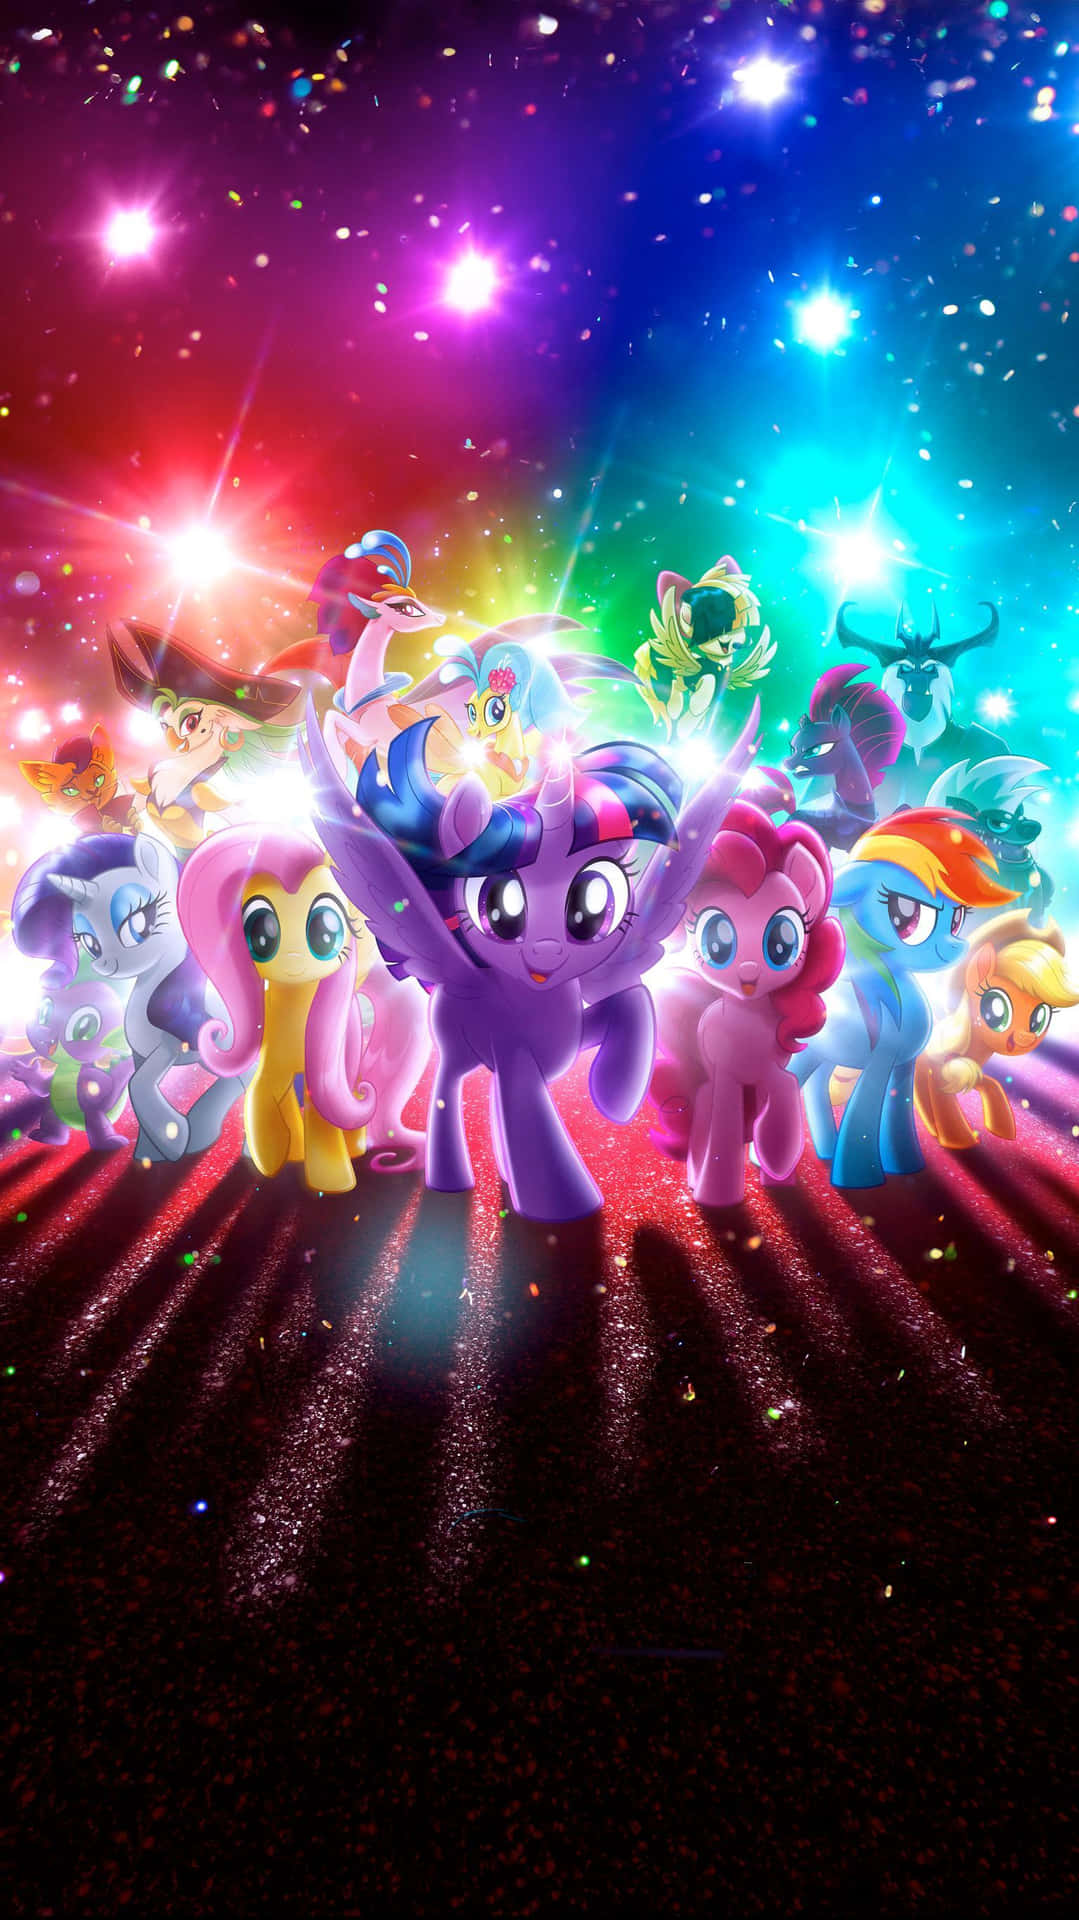 Take your favorite My Little Pony characters with you when you rock this slim phone Wallpaper